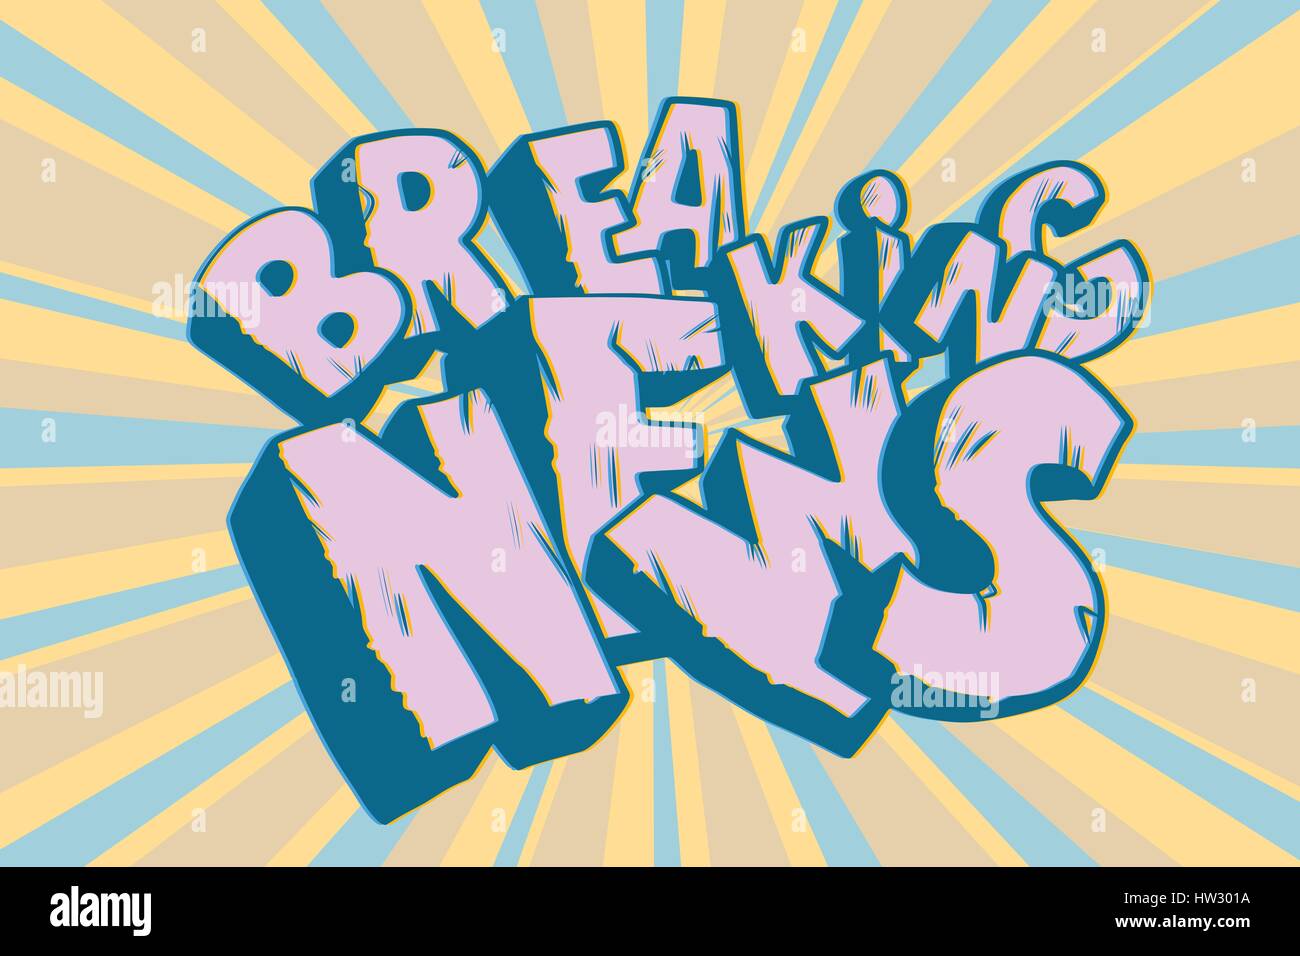 Breaking News old inscription. Faded text Stock Vector